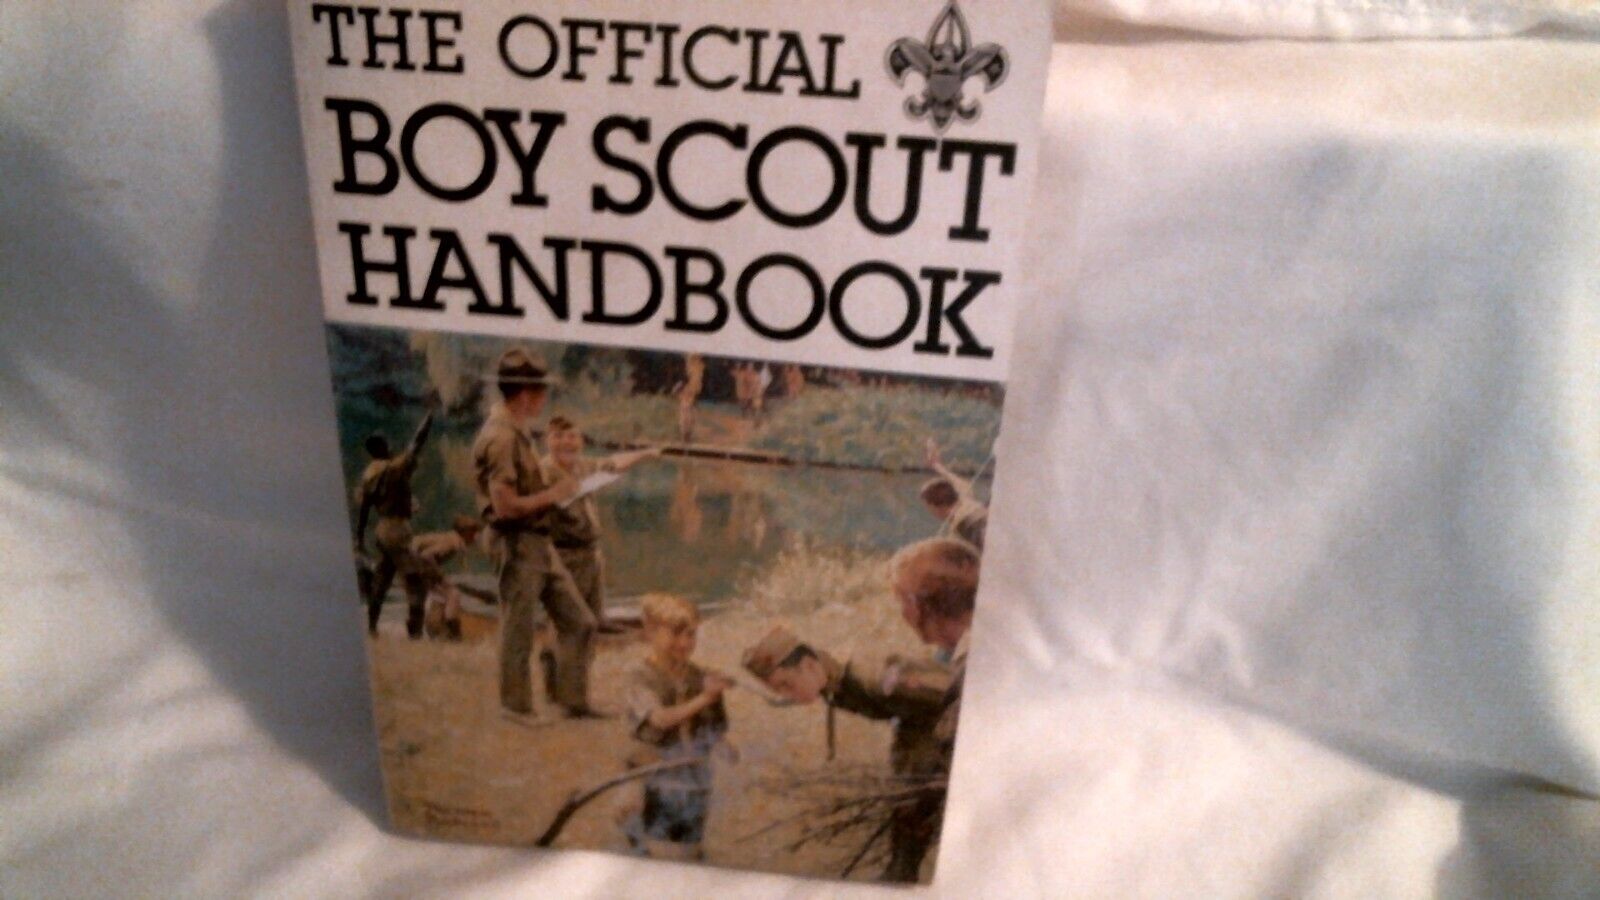 THE OFFICIAL BOY SCOUT HANDBOOK BY WILLIAM BILL HILLCOURT PAPERBOOK